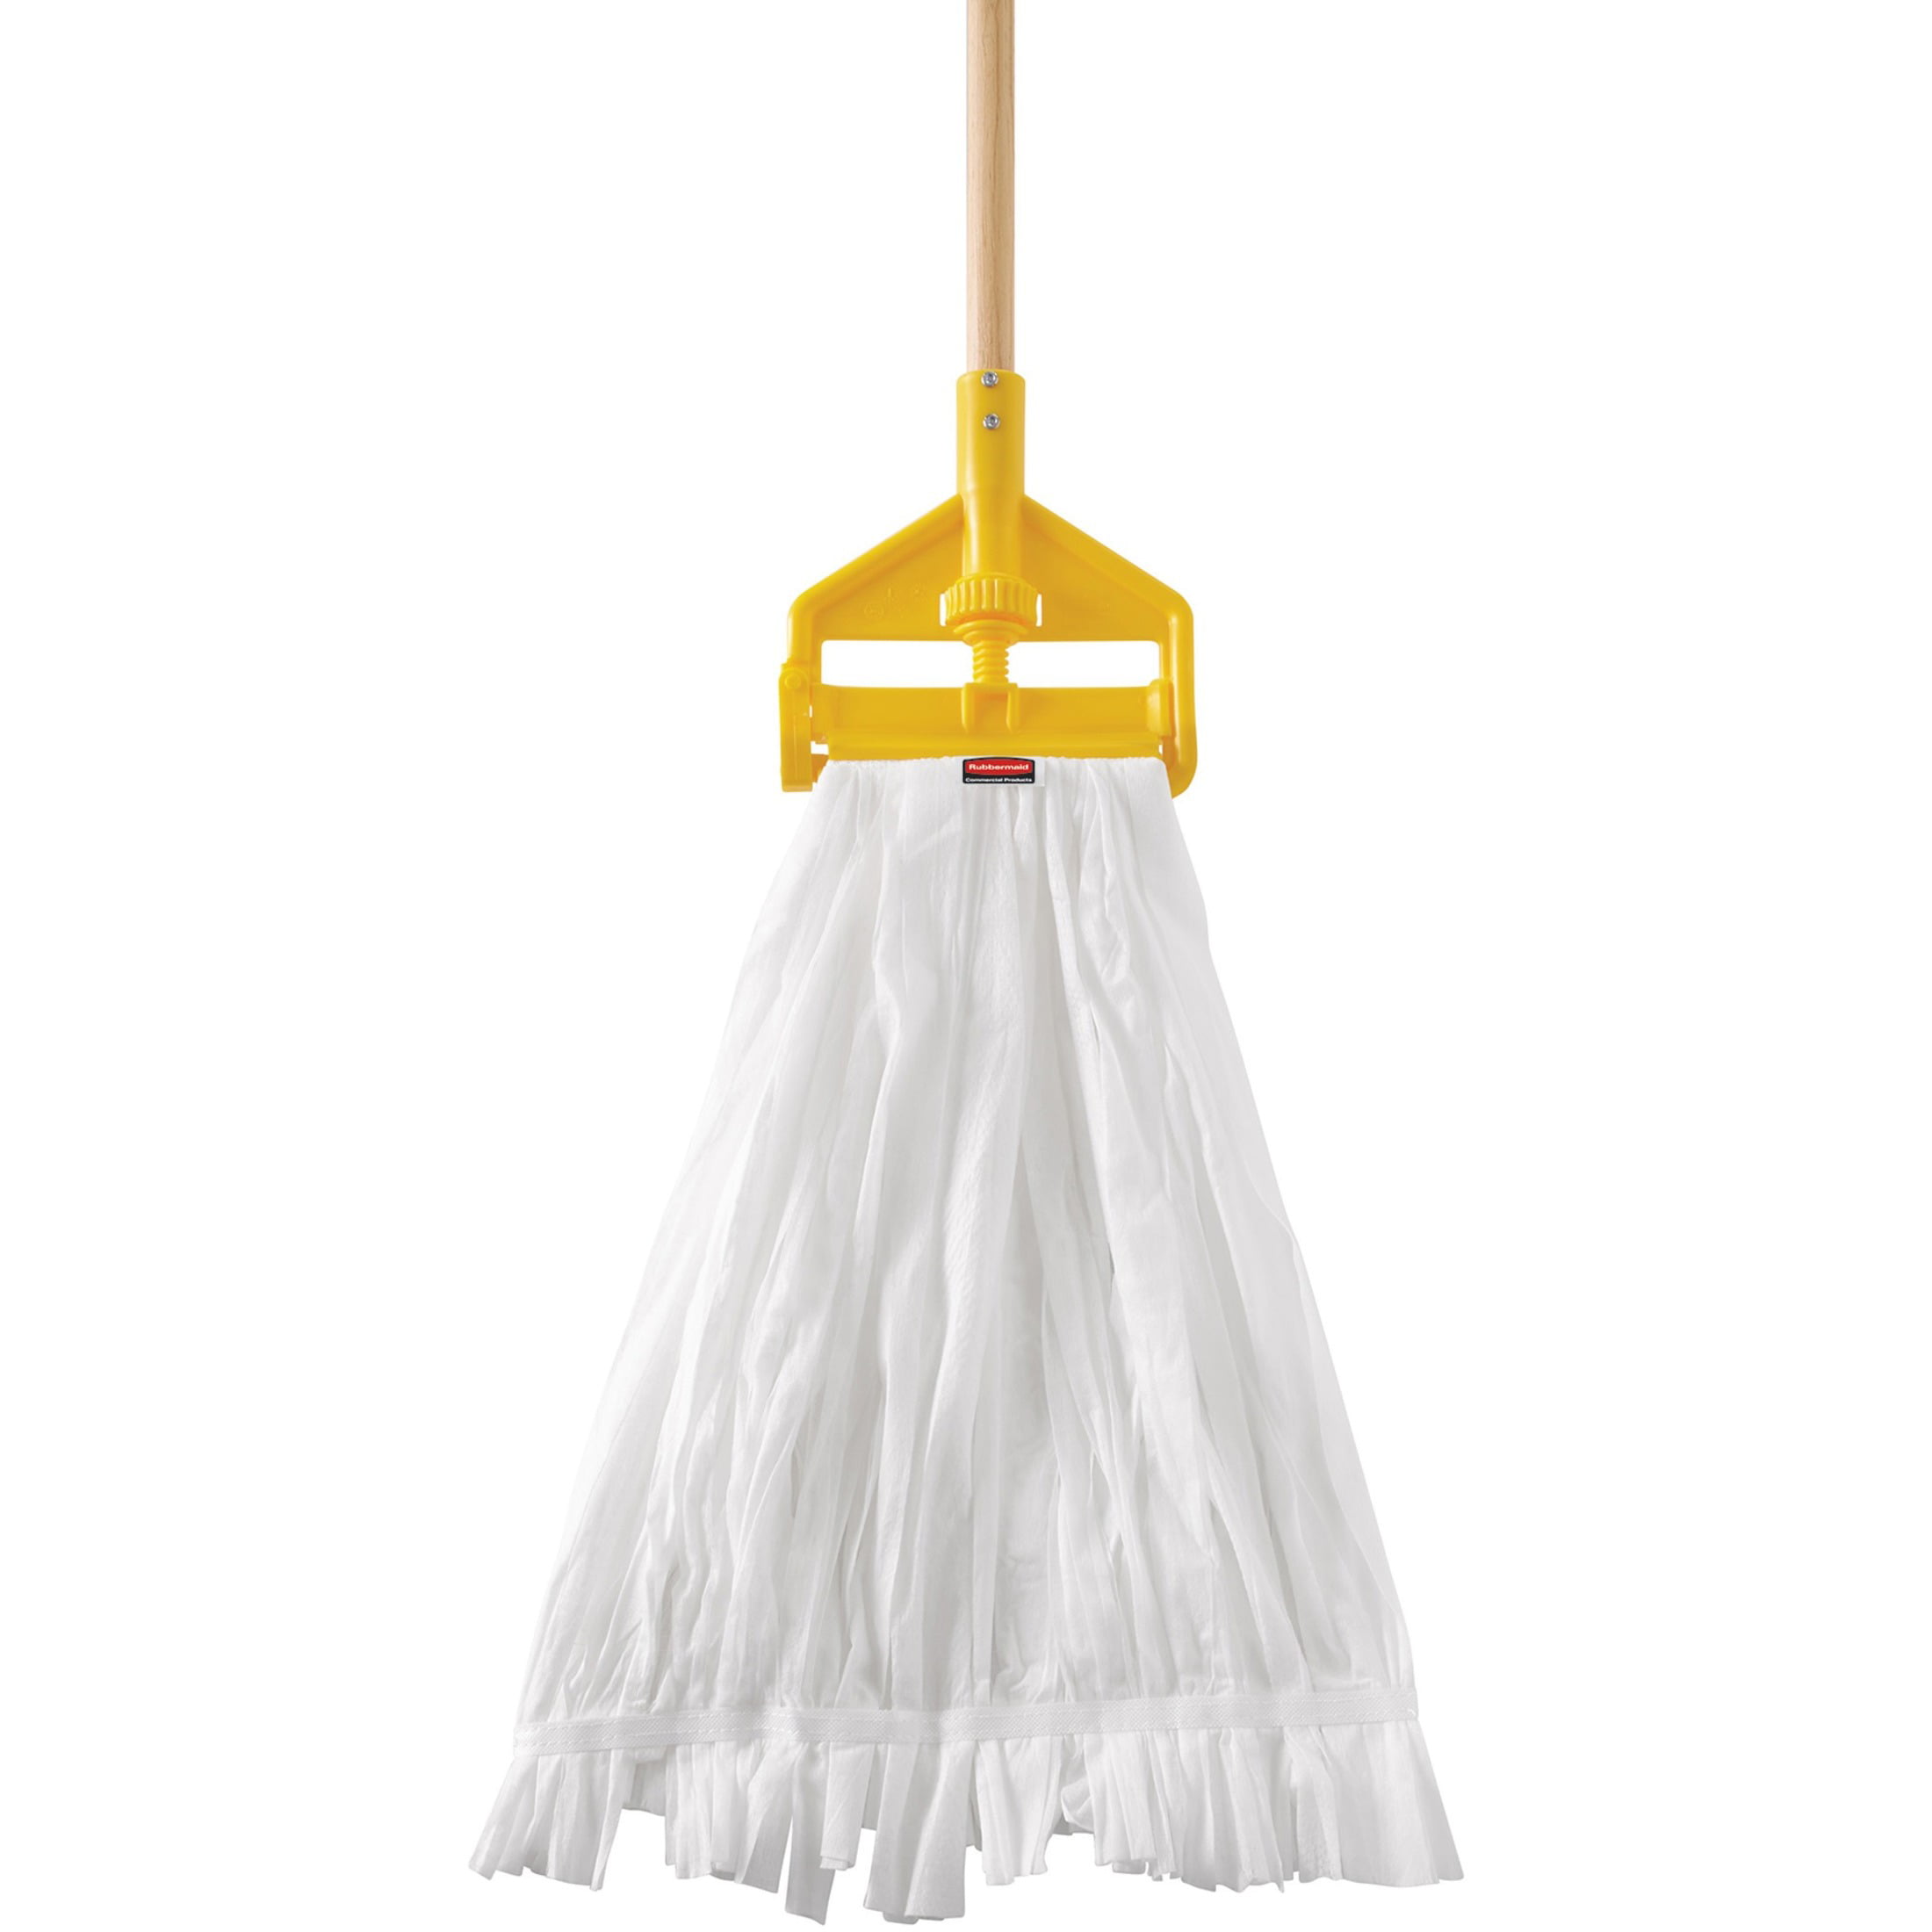 Rubbermaid Commercial Finish System Replacement White Mop Head